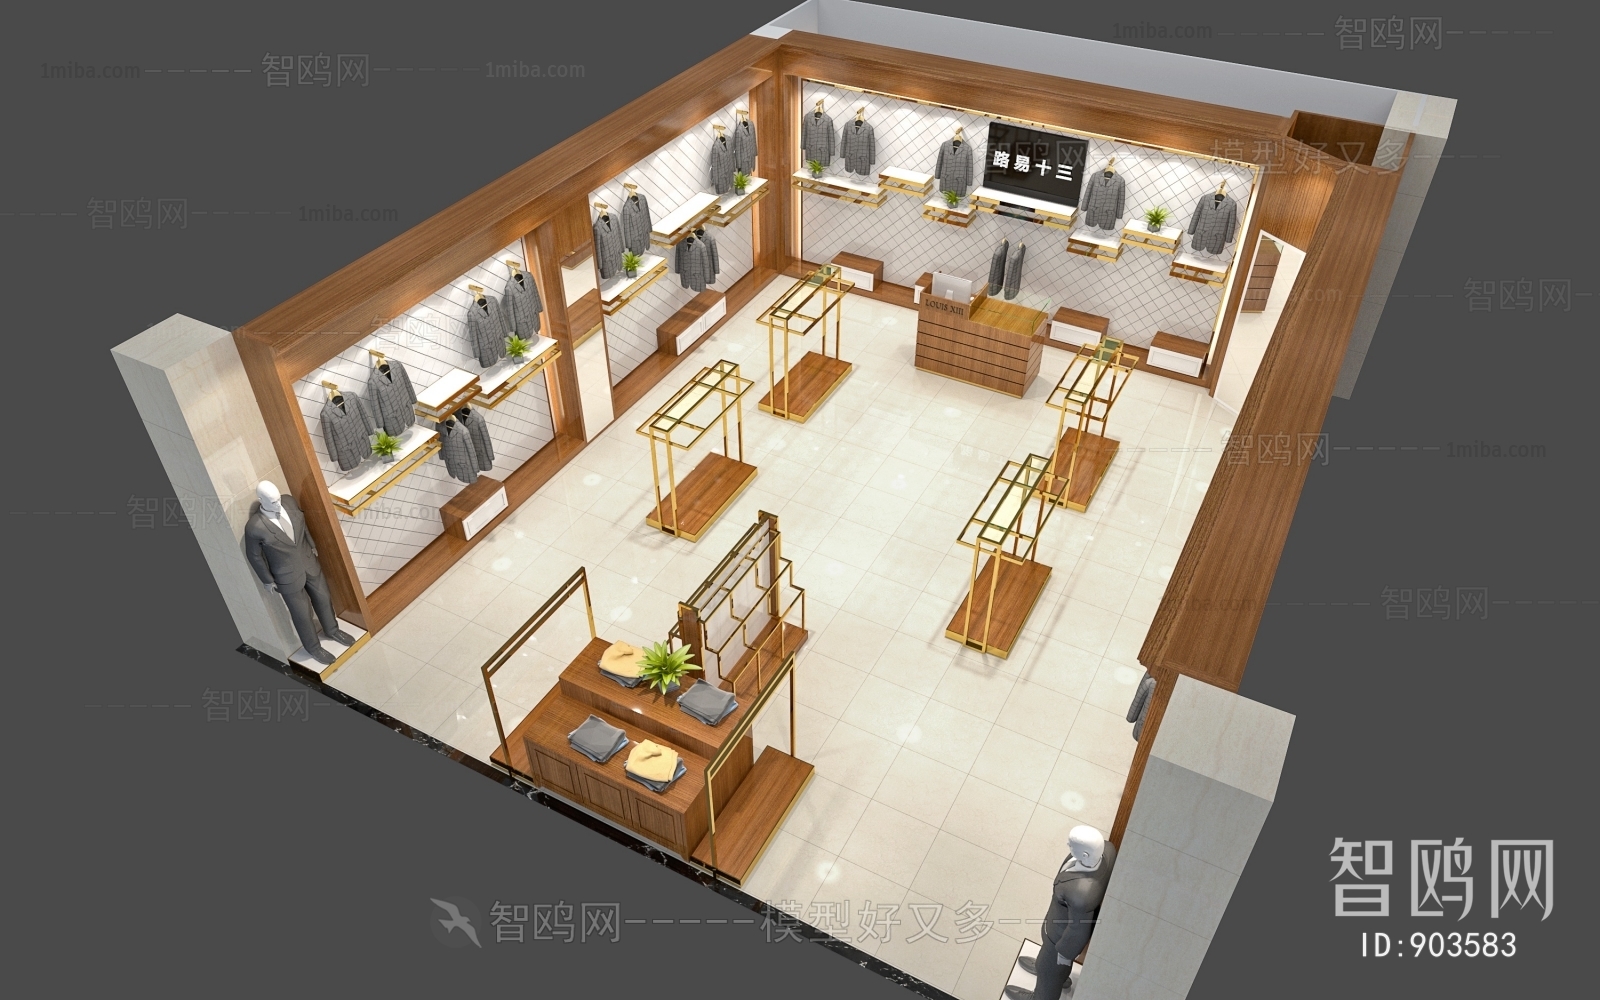 Simple European Style Clothing Store